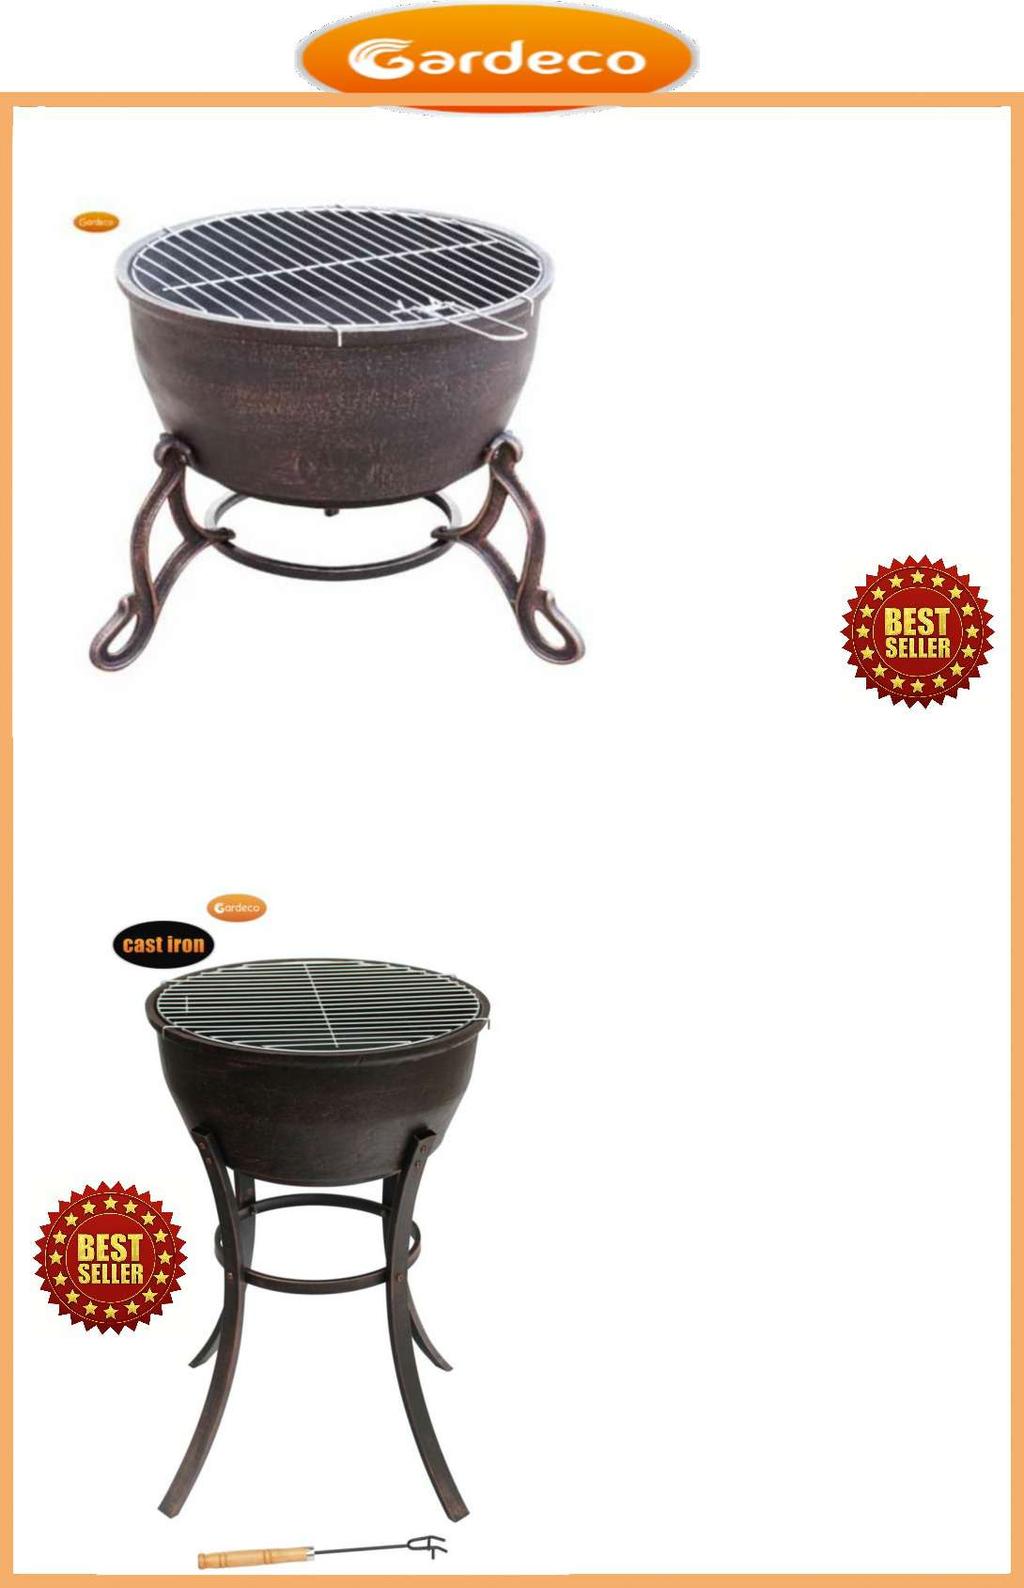 ELIDIR CAST IRON FIRE BOWL Features: Best-selling deep fire pit Made of cast iron so strong and durable Decorative cast iron legs Suitable for frequent and prolonged use Suitable for big fires